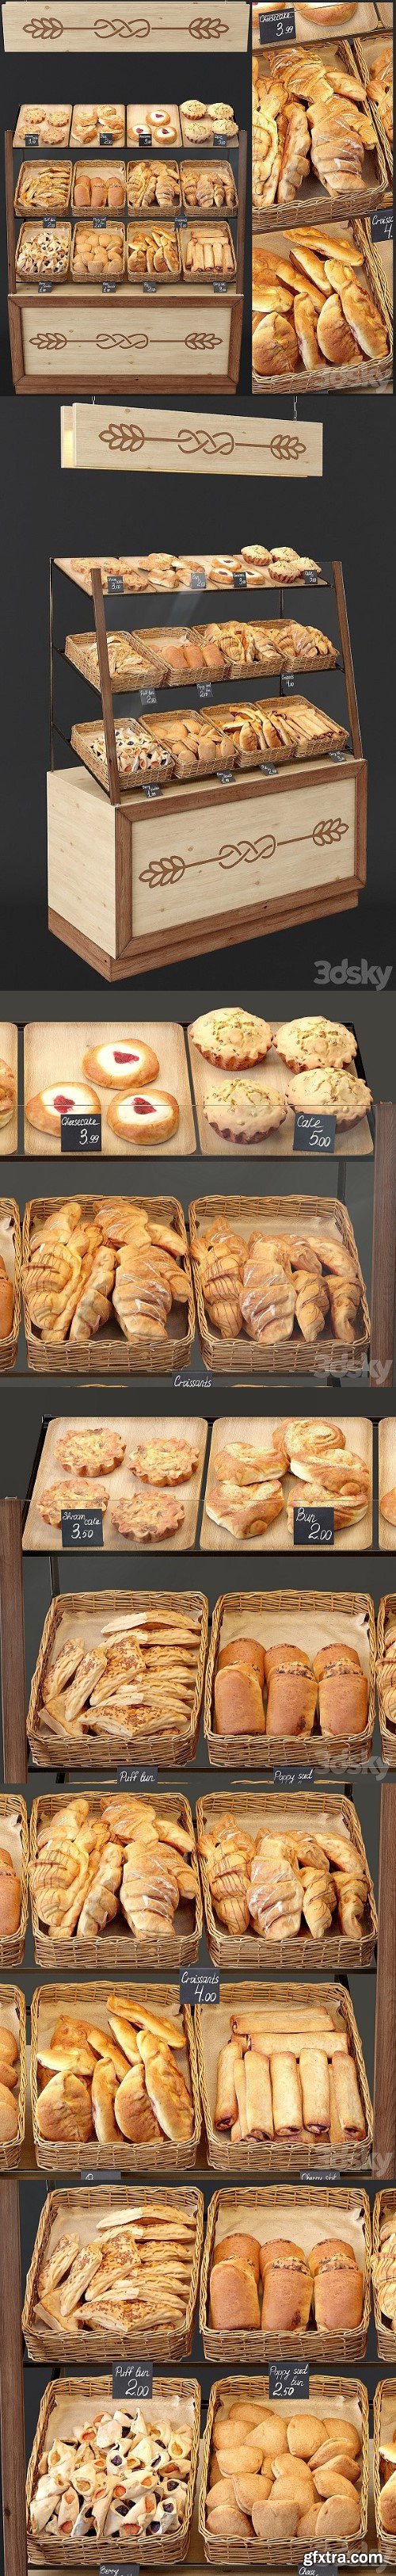 Showcase With Pastries For Shop and Cafe Bread | Vray+Corona